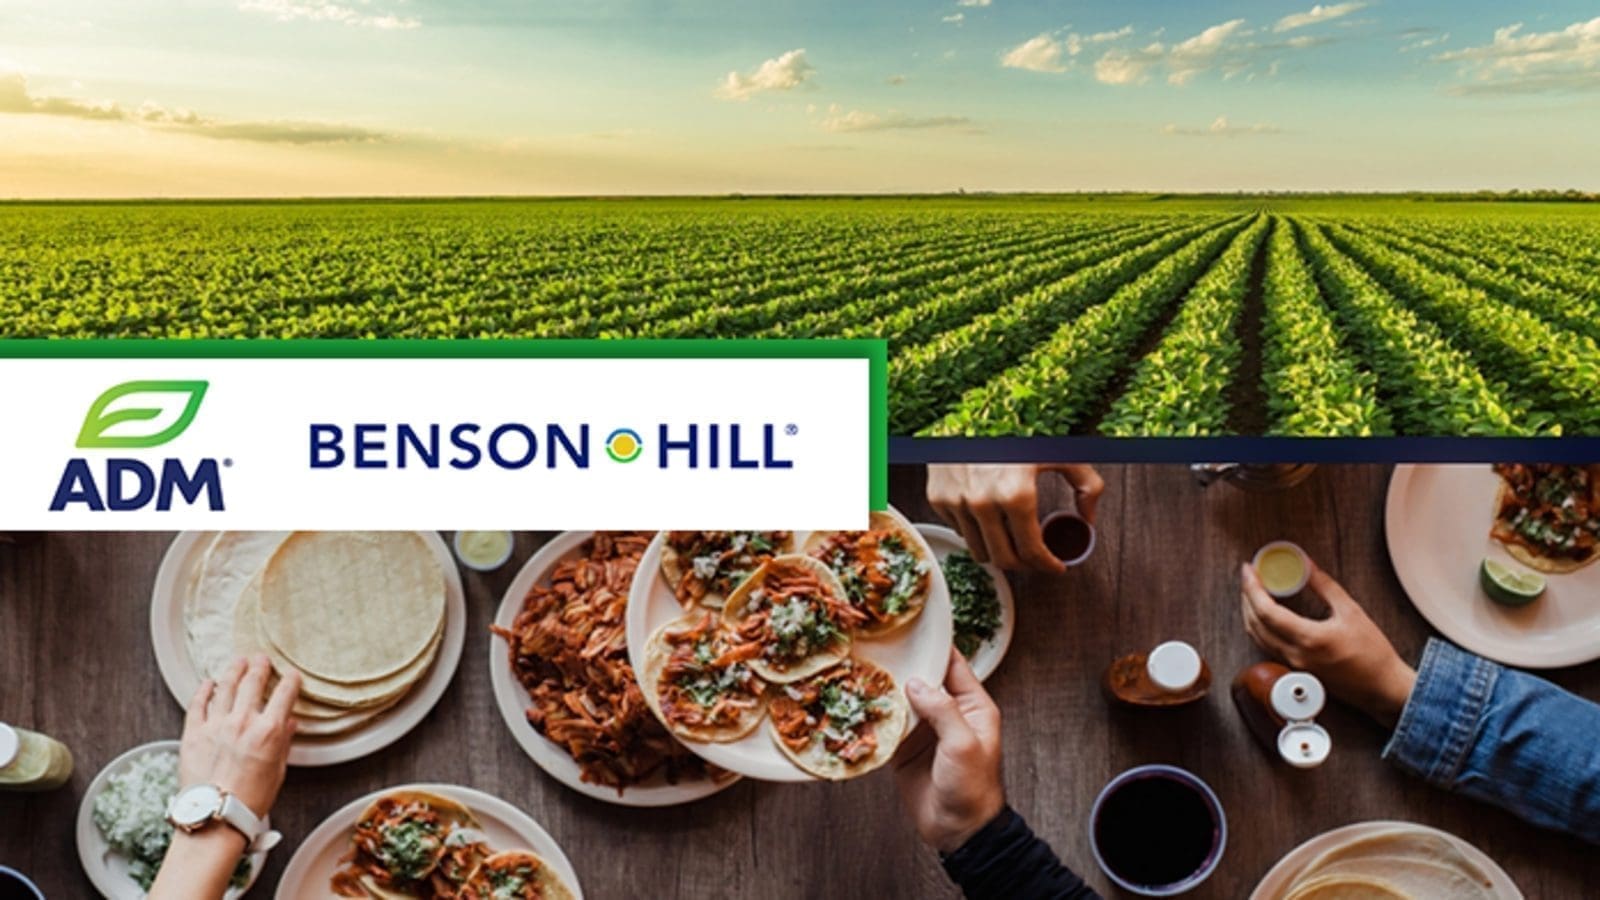 ADM partners Benson Hill to scale innovative soy ingredients